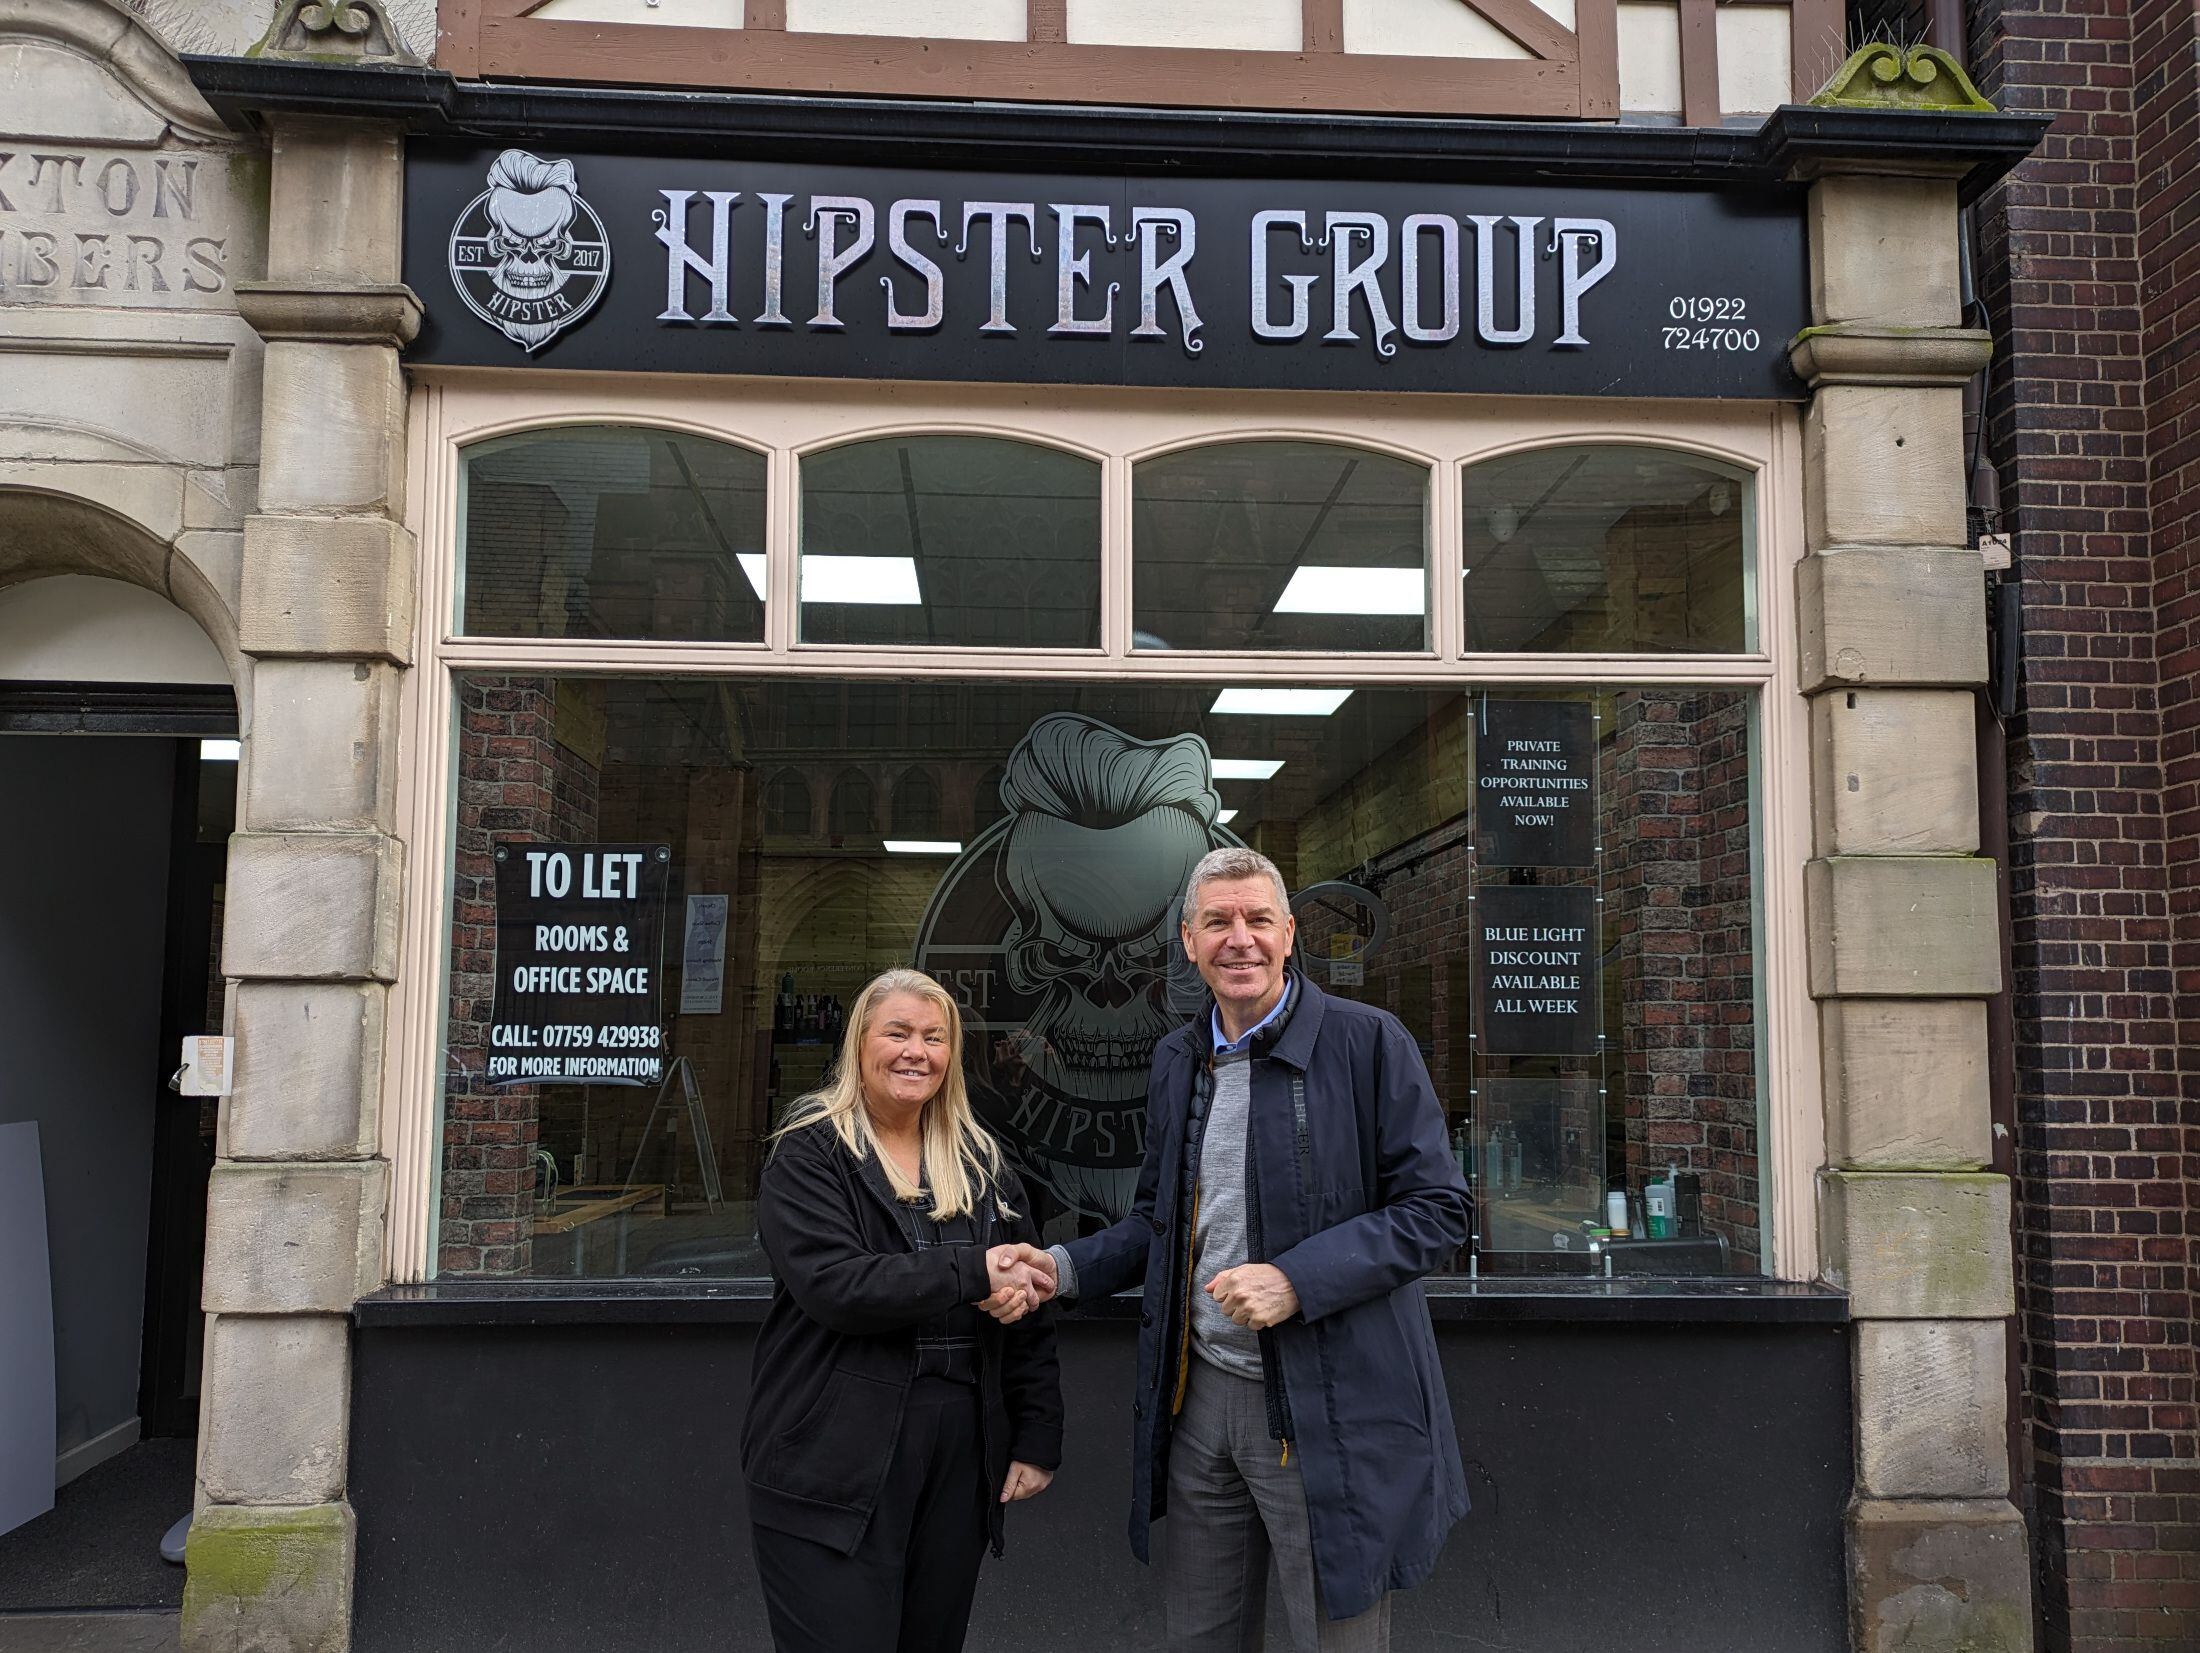 Hairdressing specialist receives £5k grant from Walsall Business Support

